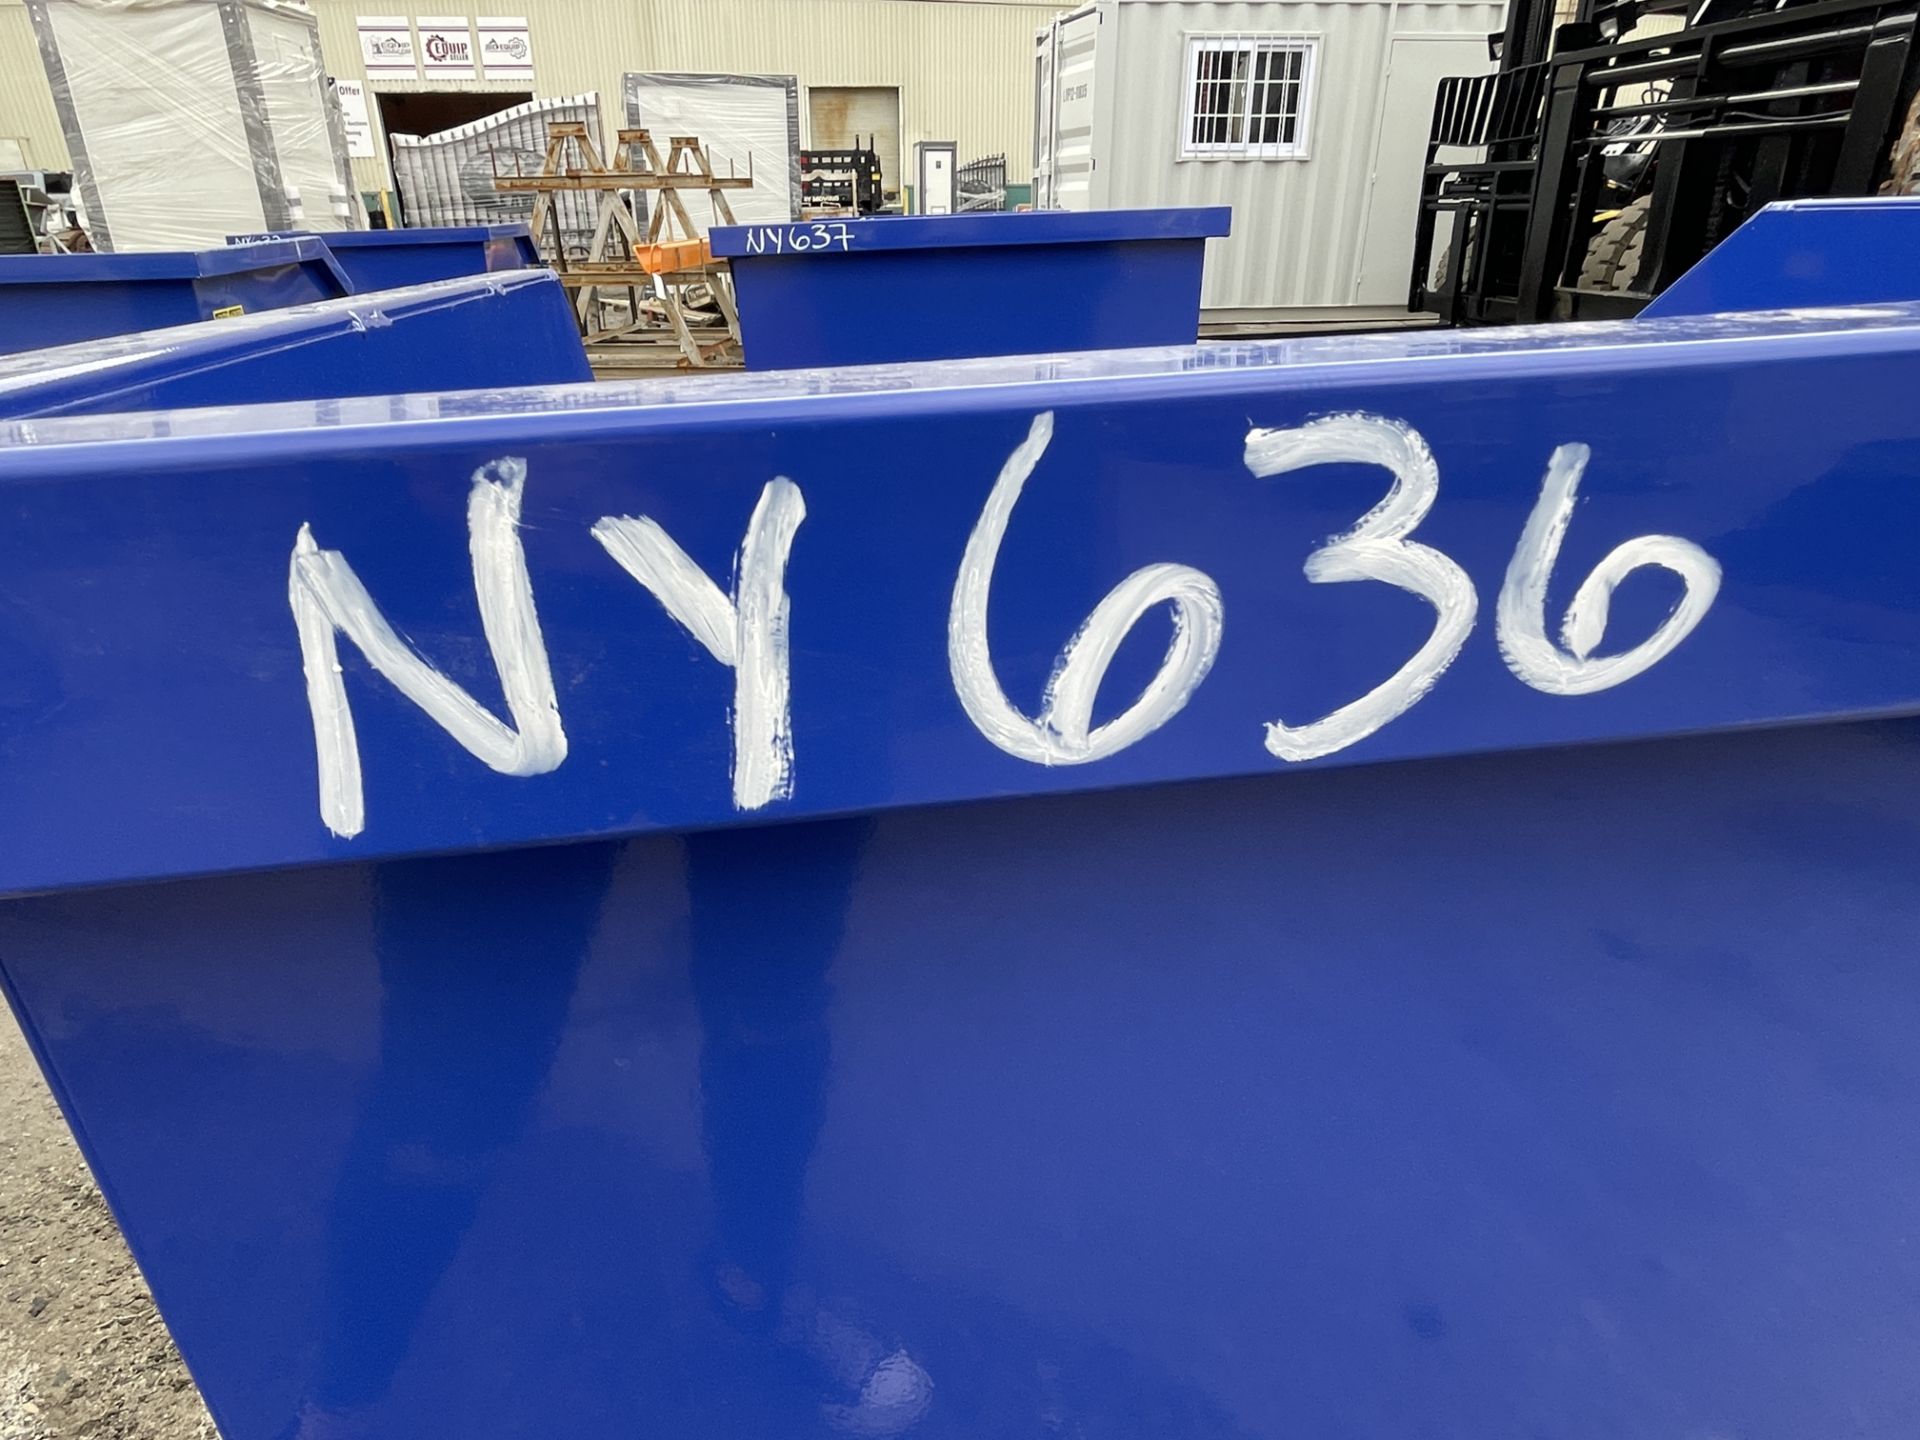 Brand New 1 Cubic Yard Self Dumping Hopper (NY626) - Image 5 of 5